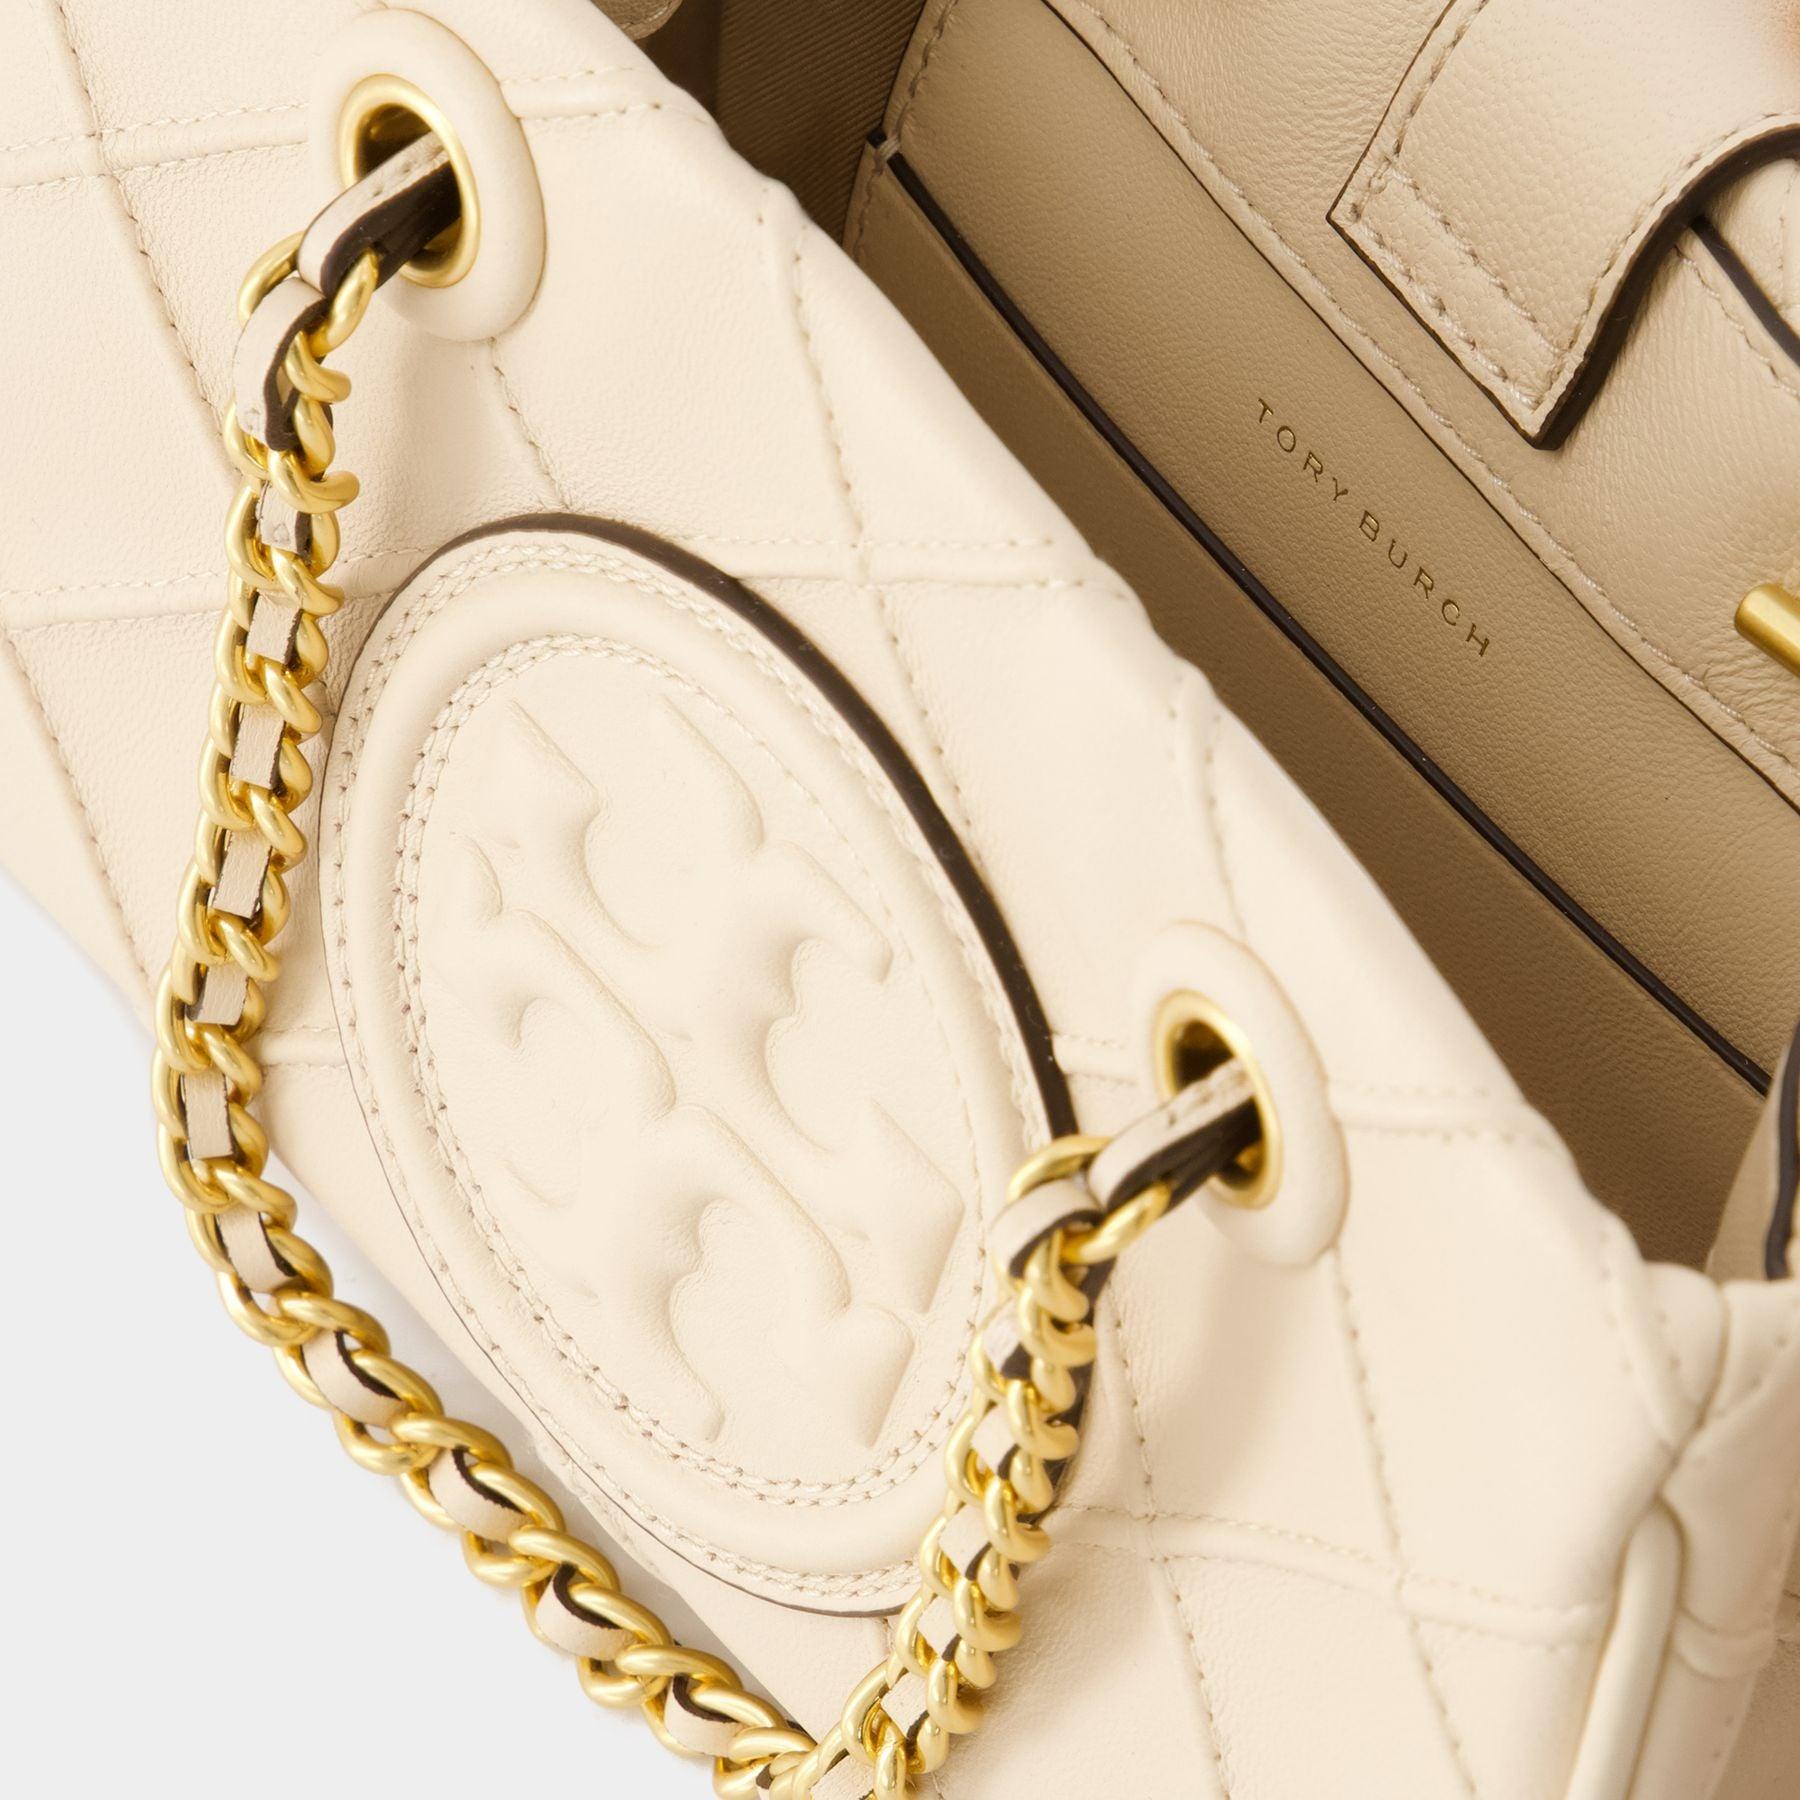 Tory Burch Small Fleming Soft Bucket Bag In New Cream